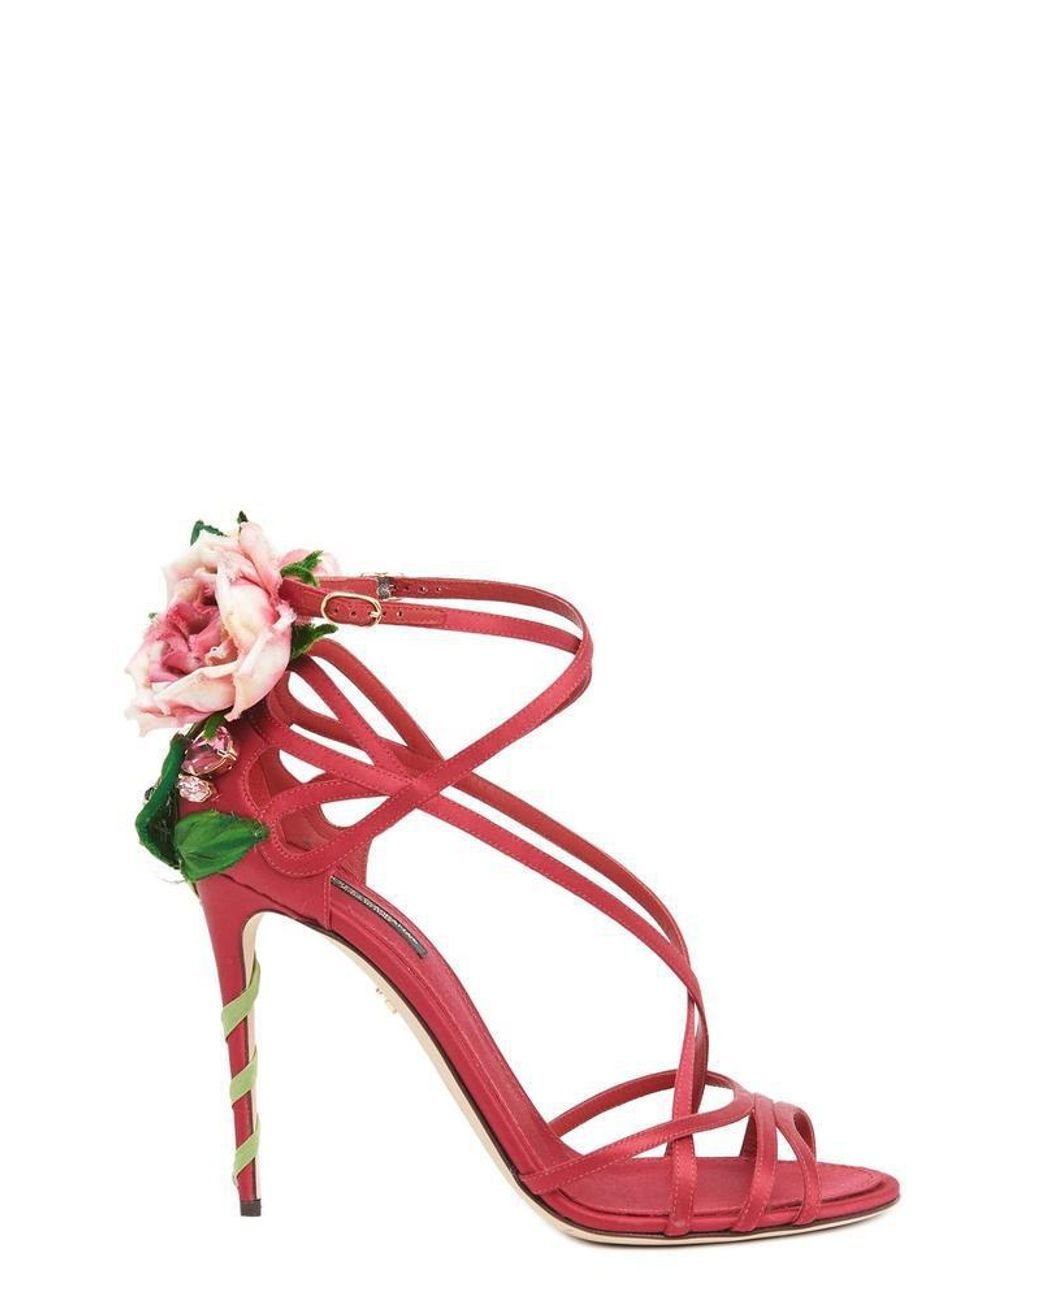 Dolce & Gabbana Keira Rose Jewelled Sandals in Red | Lyst